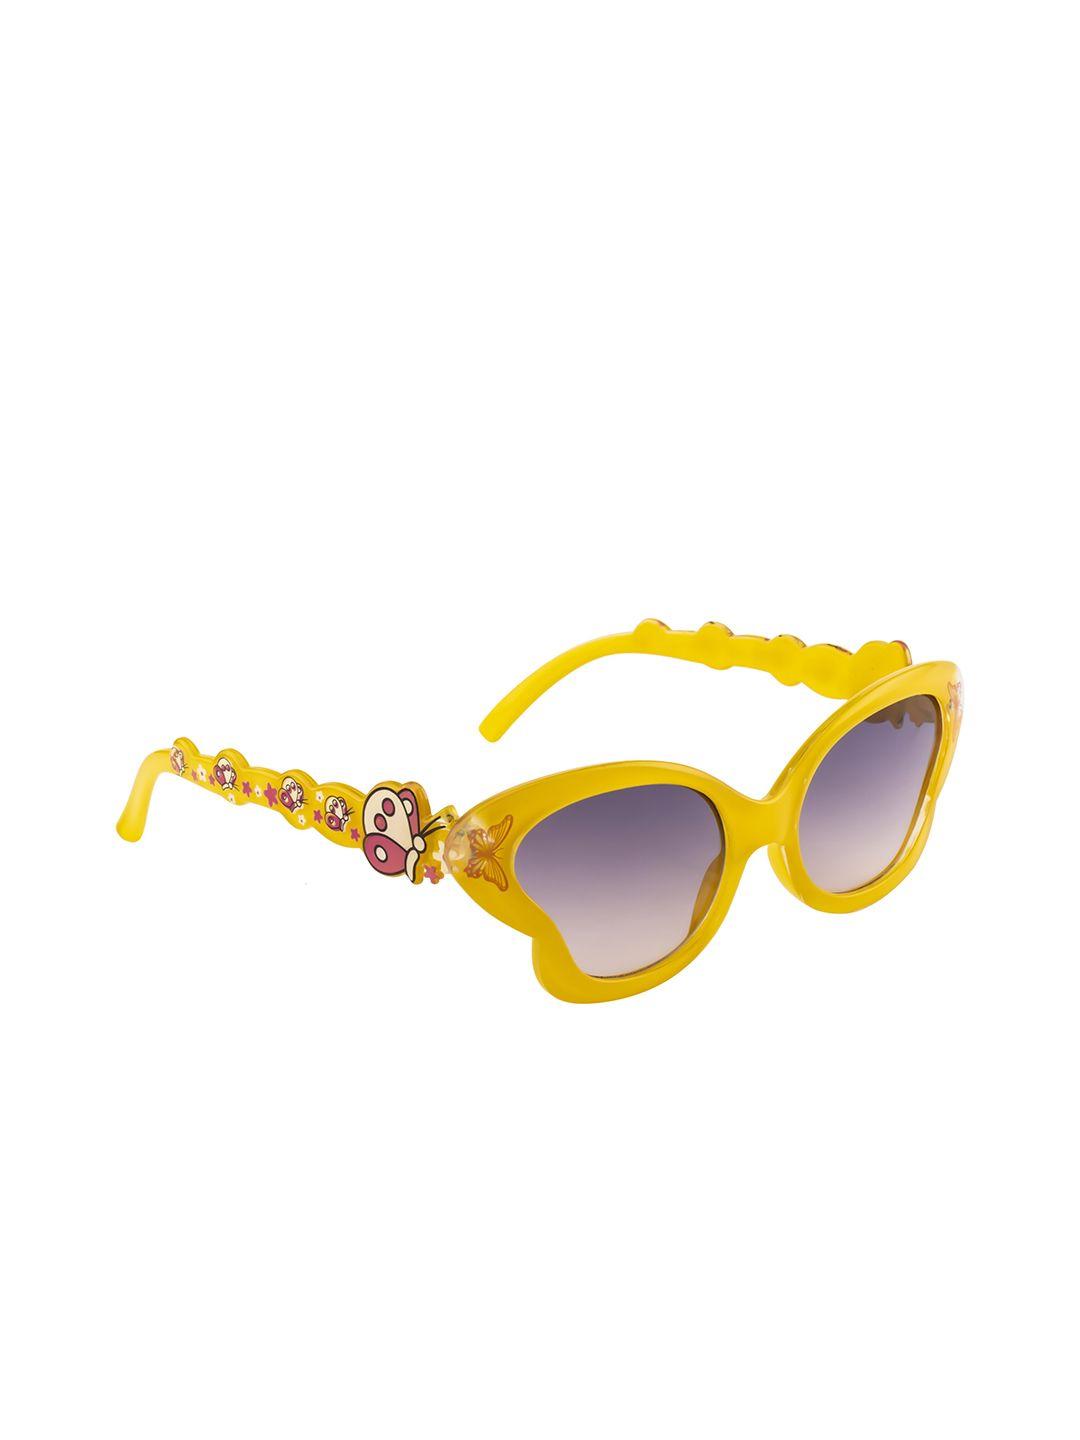 yk kids lens & butterfly sunglasses with uv protected lens yk-j8168